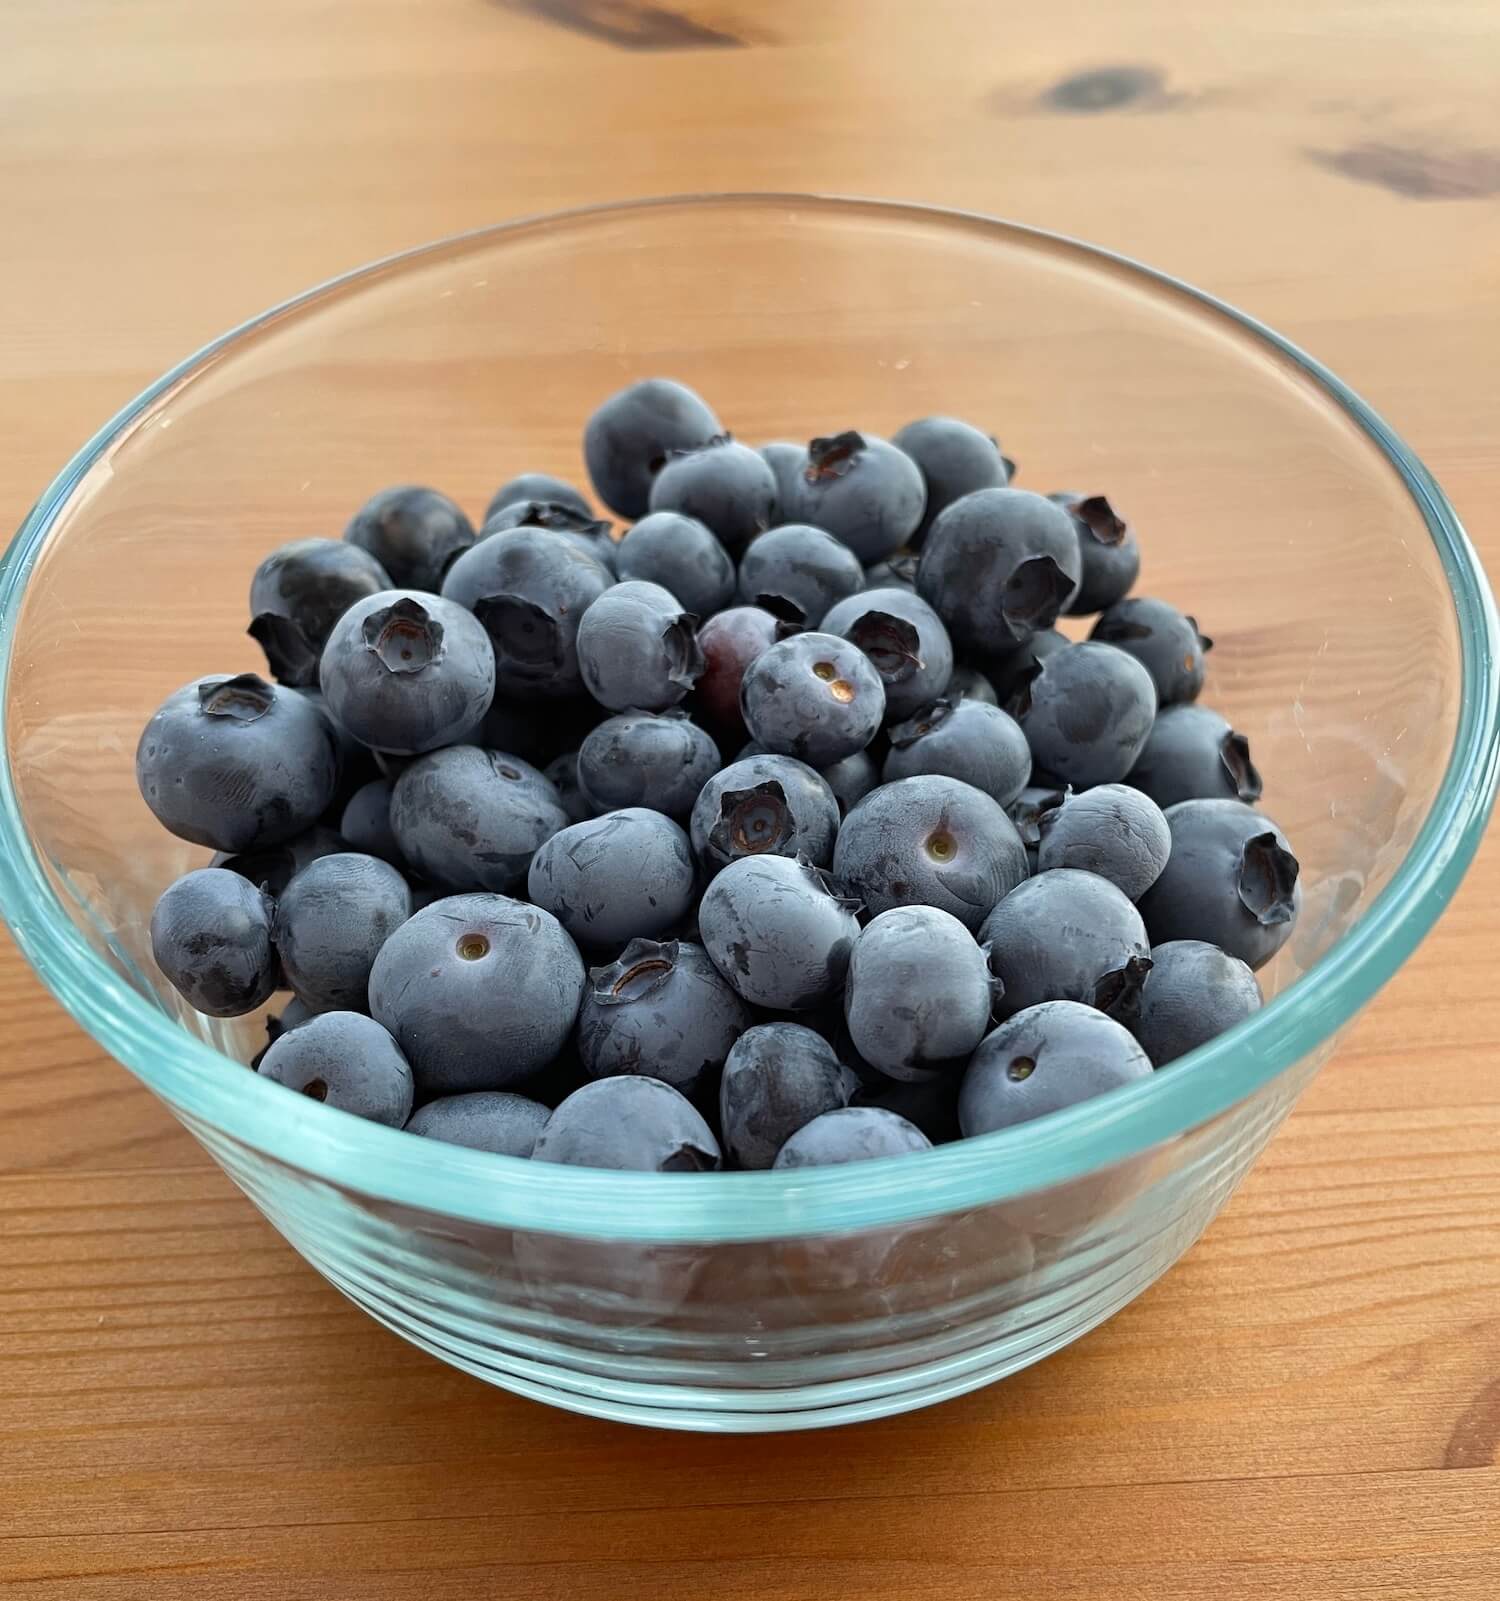 a clear glass bowl sitting on a wood table almost full of blueberries